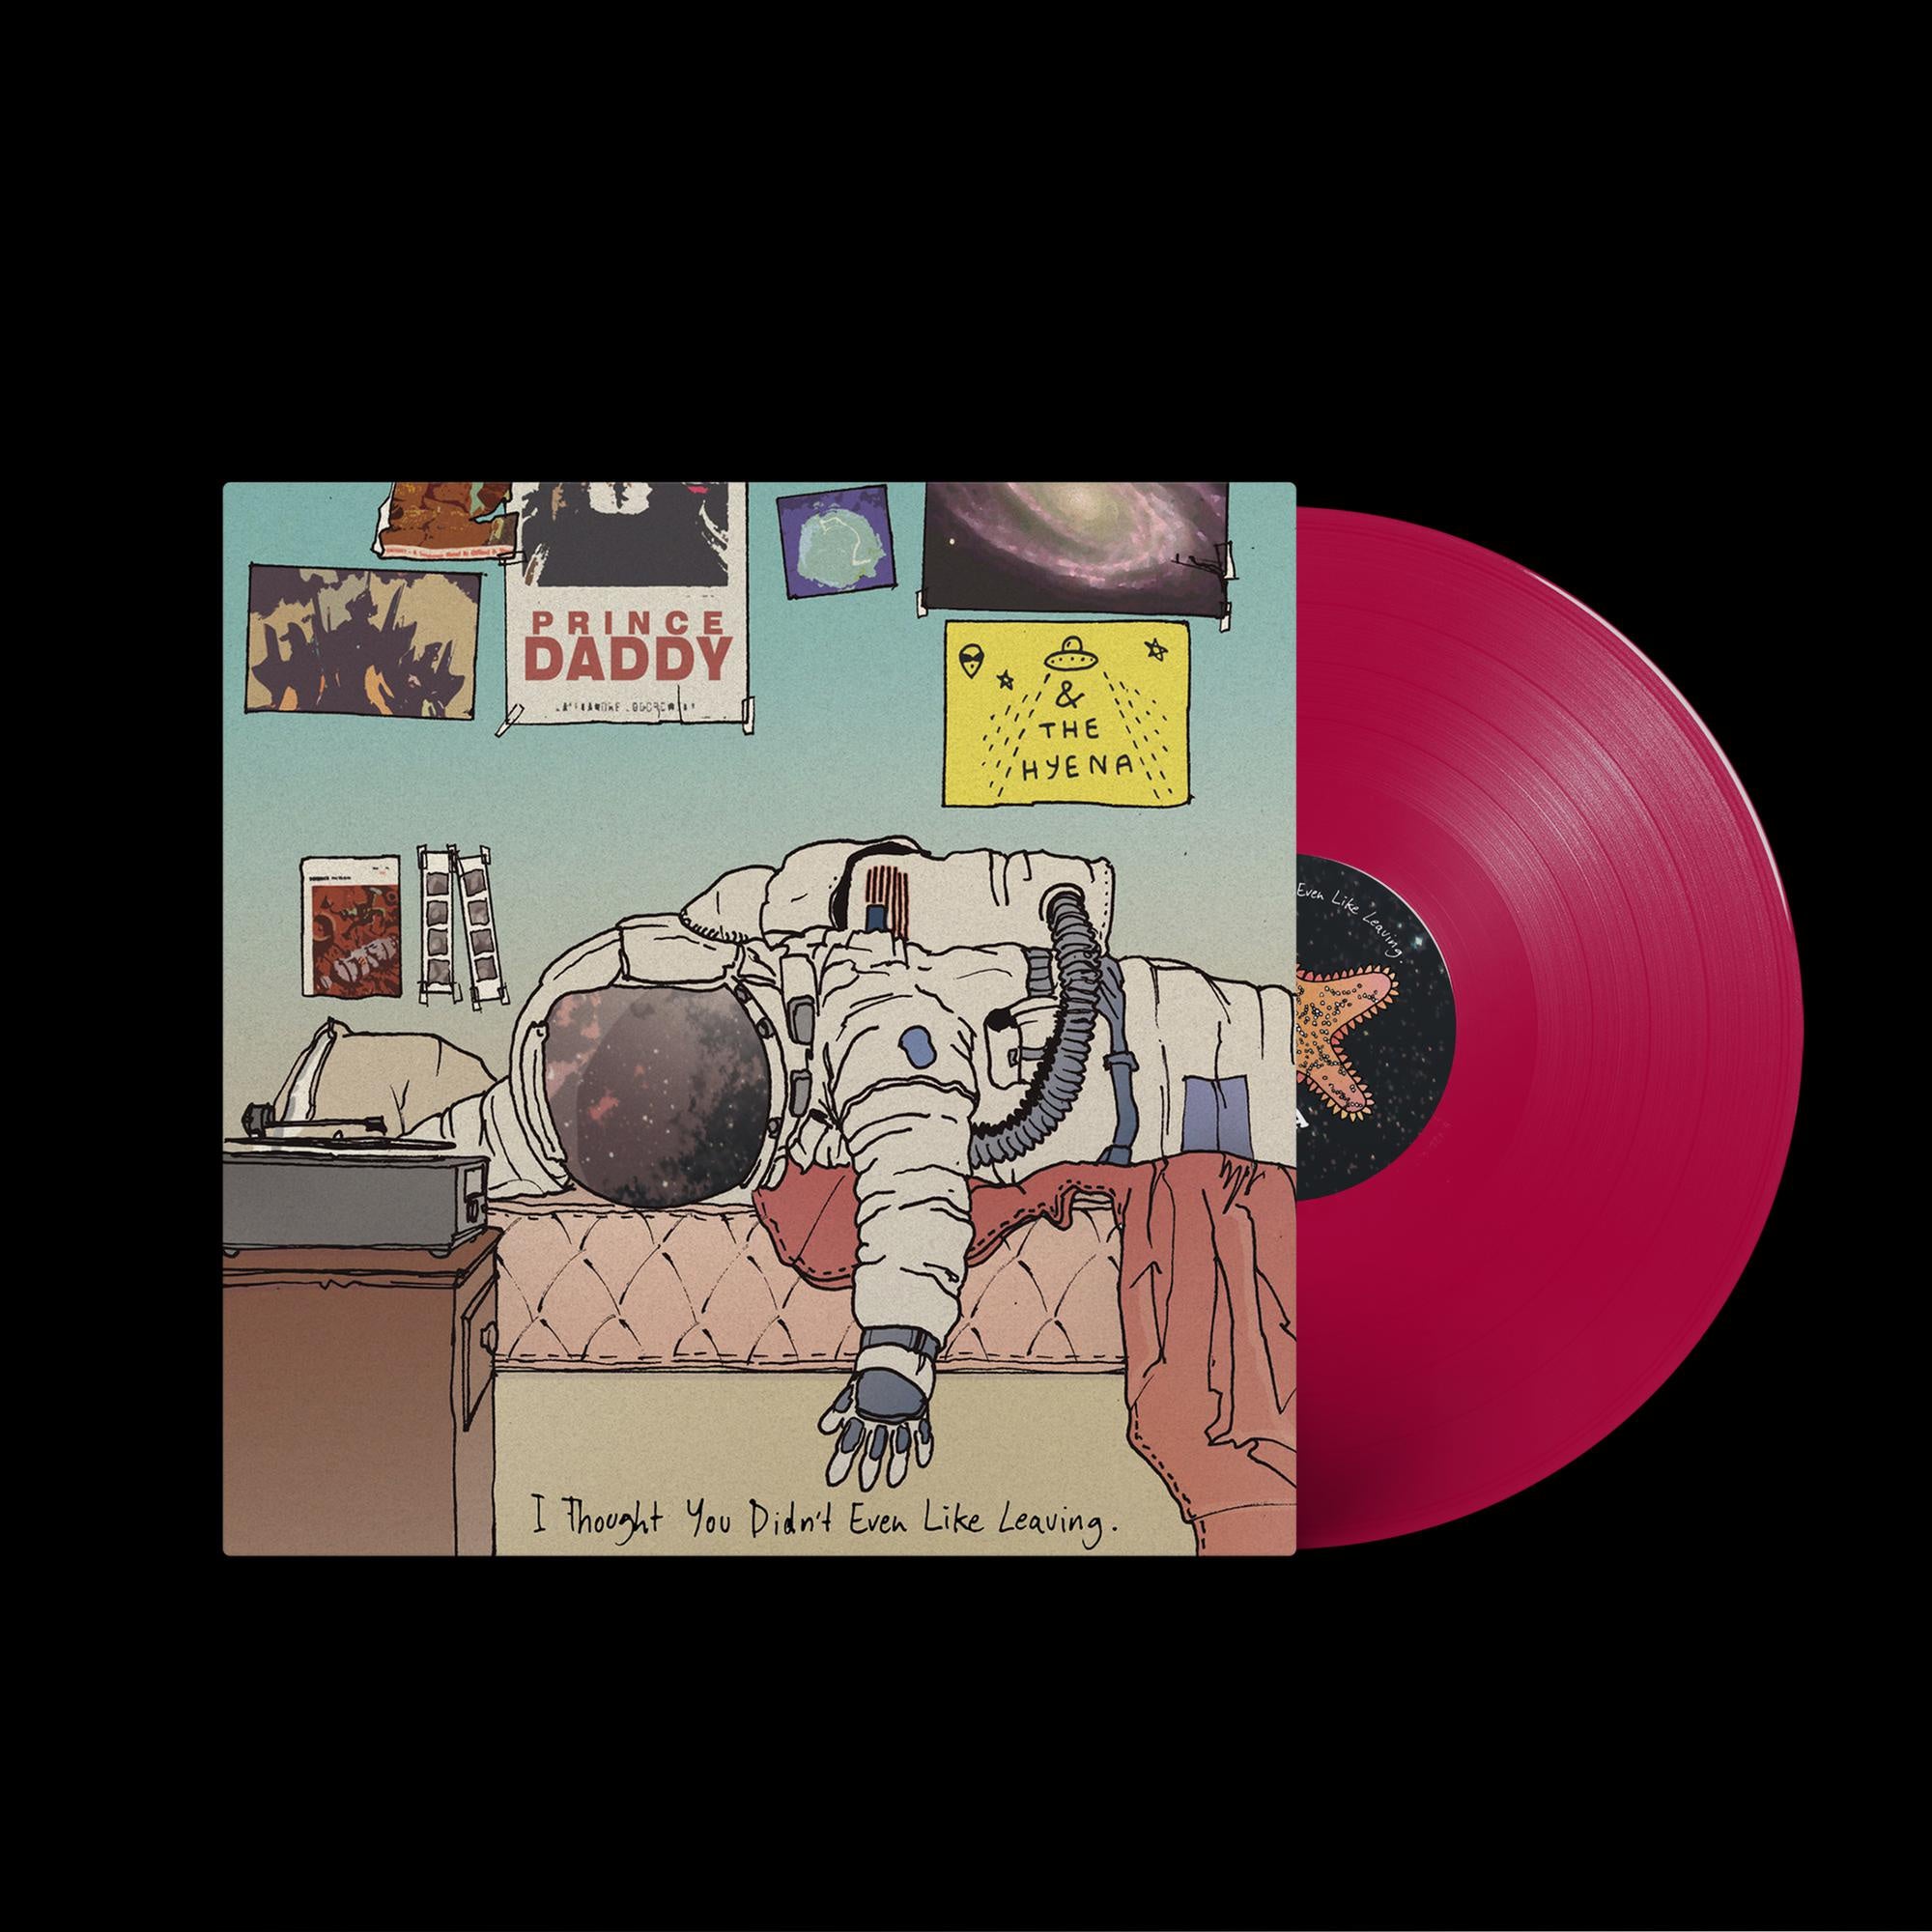 Prince Daddy & The Hyena ‎– I Thought You Didn't Even Like Leaving - New LP Record 2020 Counter Intuitive Red Colored Vinyl - Emo / Punk